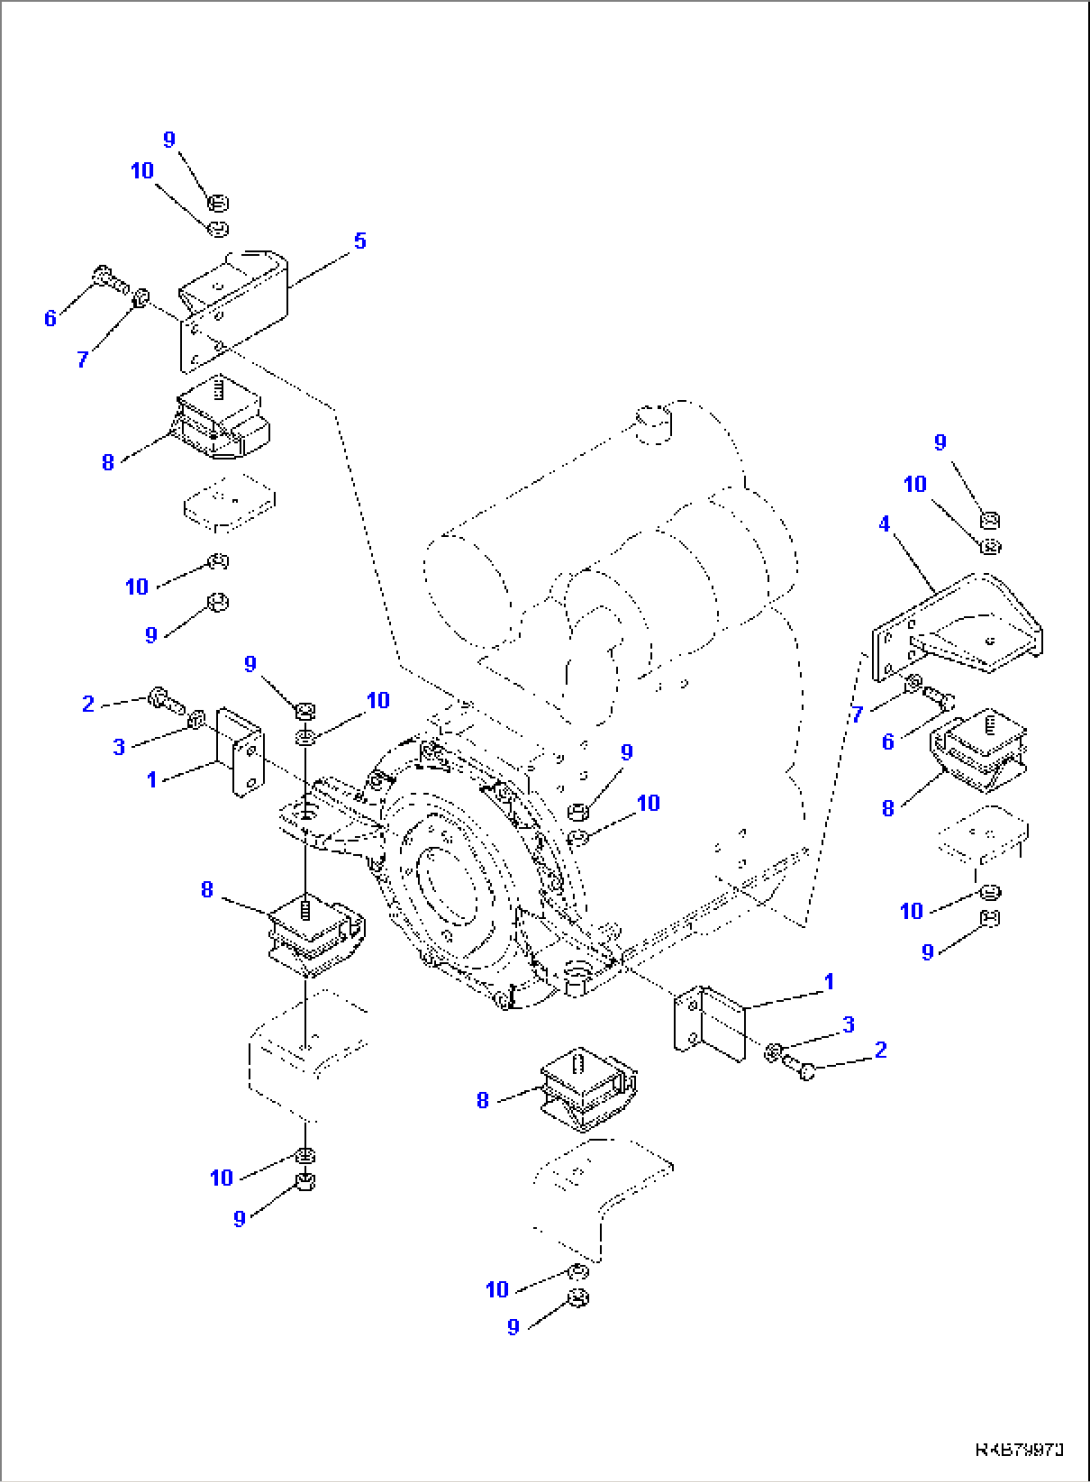 ENGINE (MOUNTING PARTS)